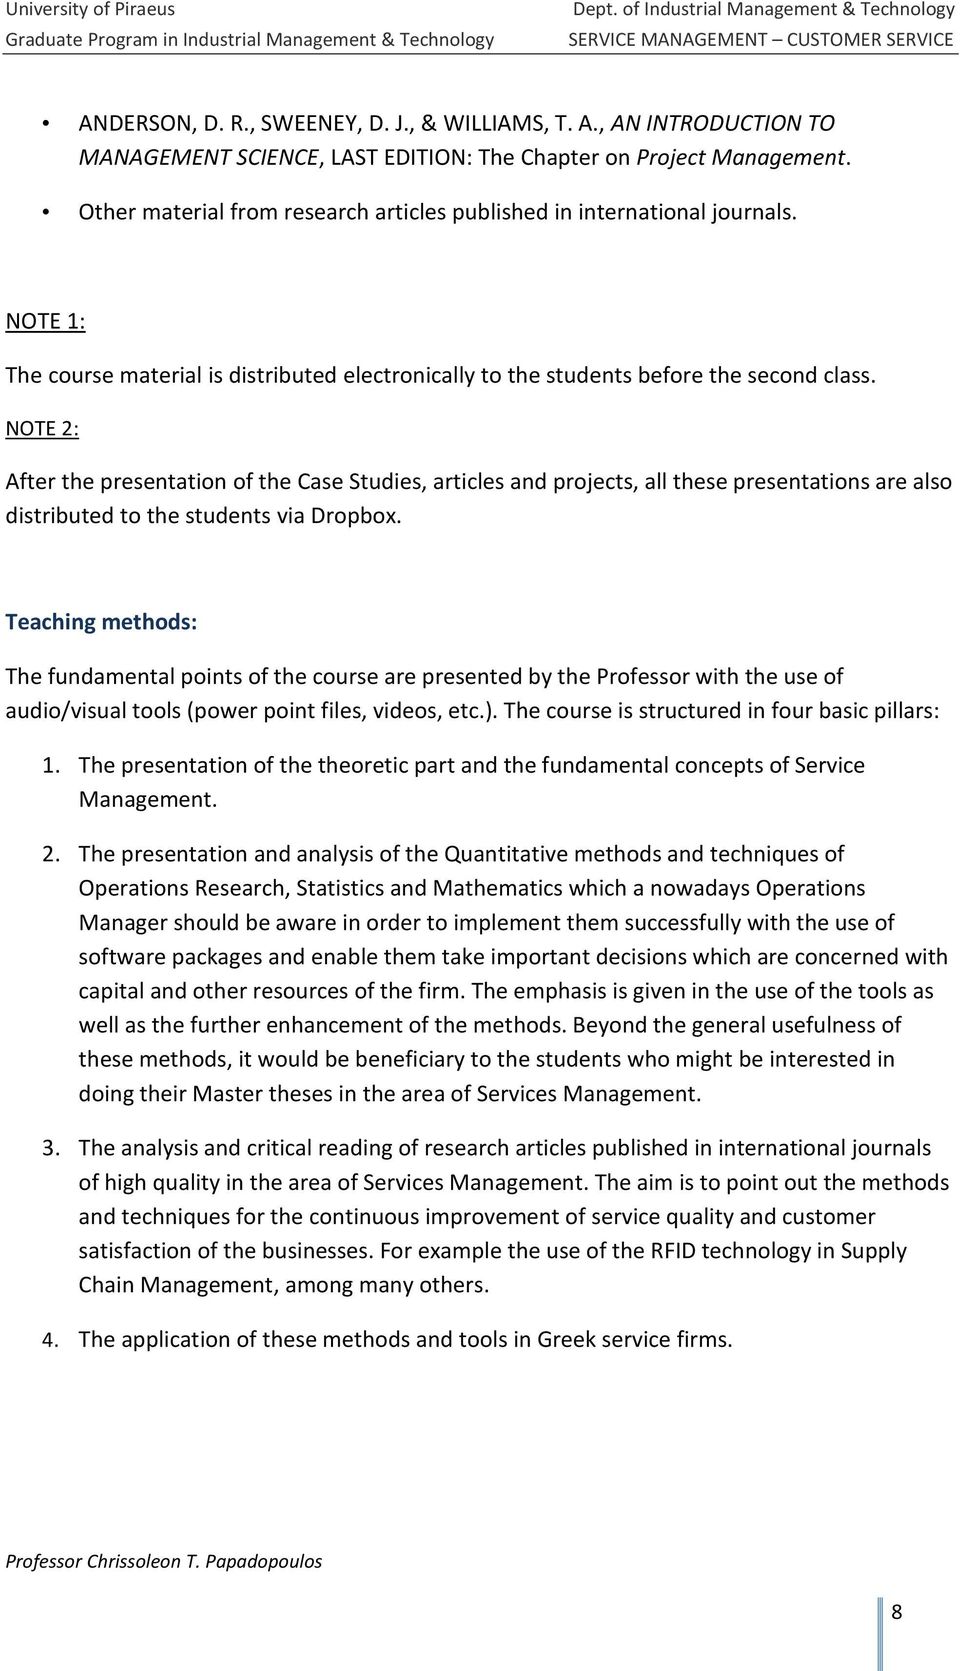 NOTE 1: The course material is distributed electronically to the students before the second class.